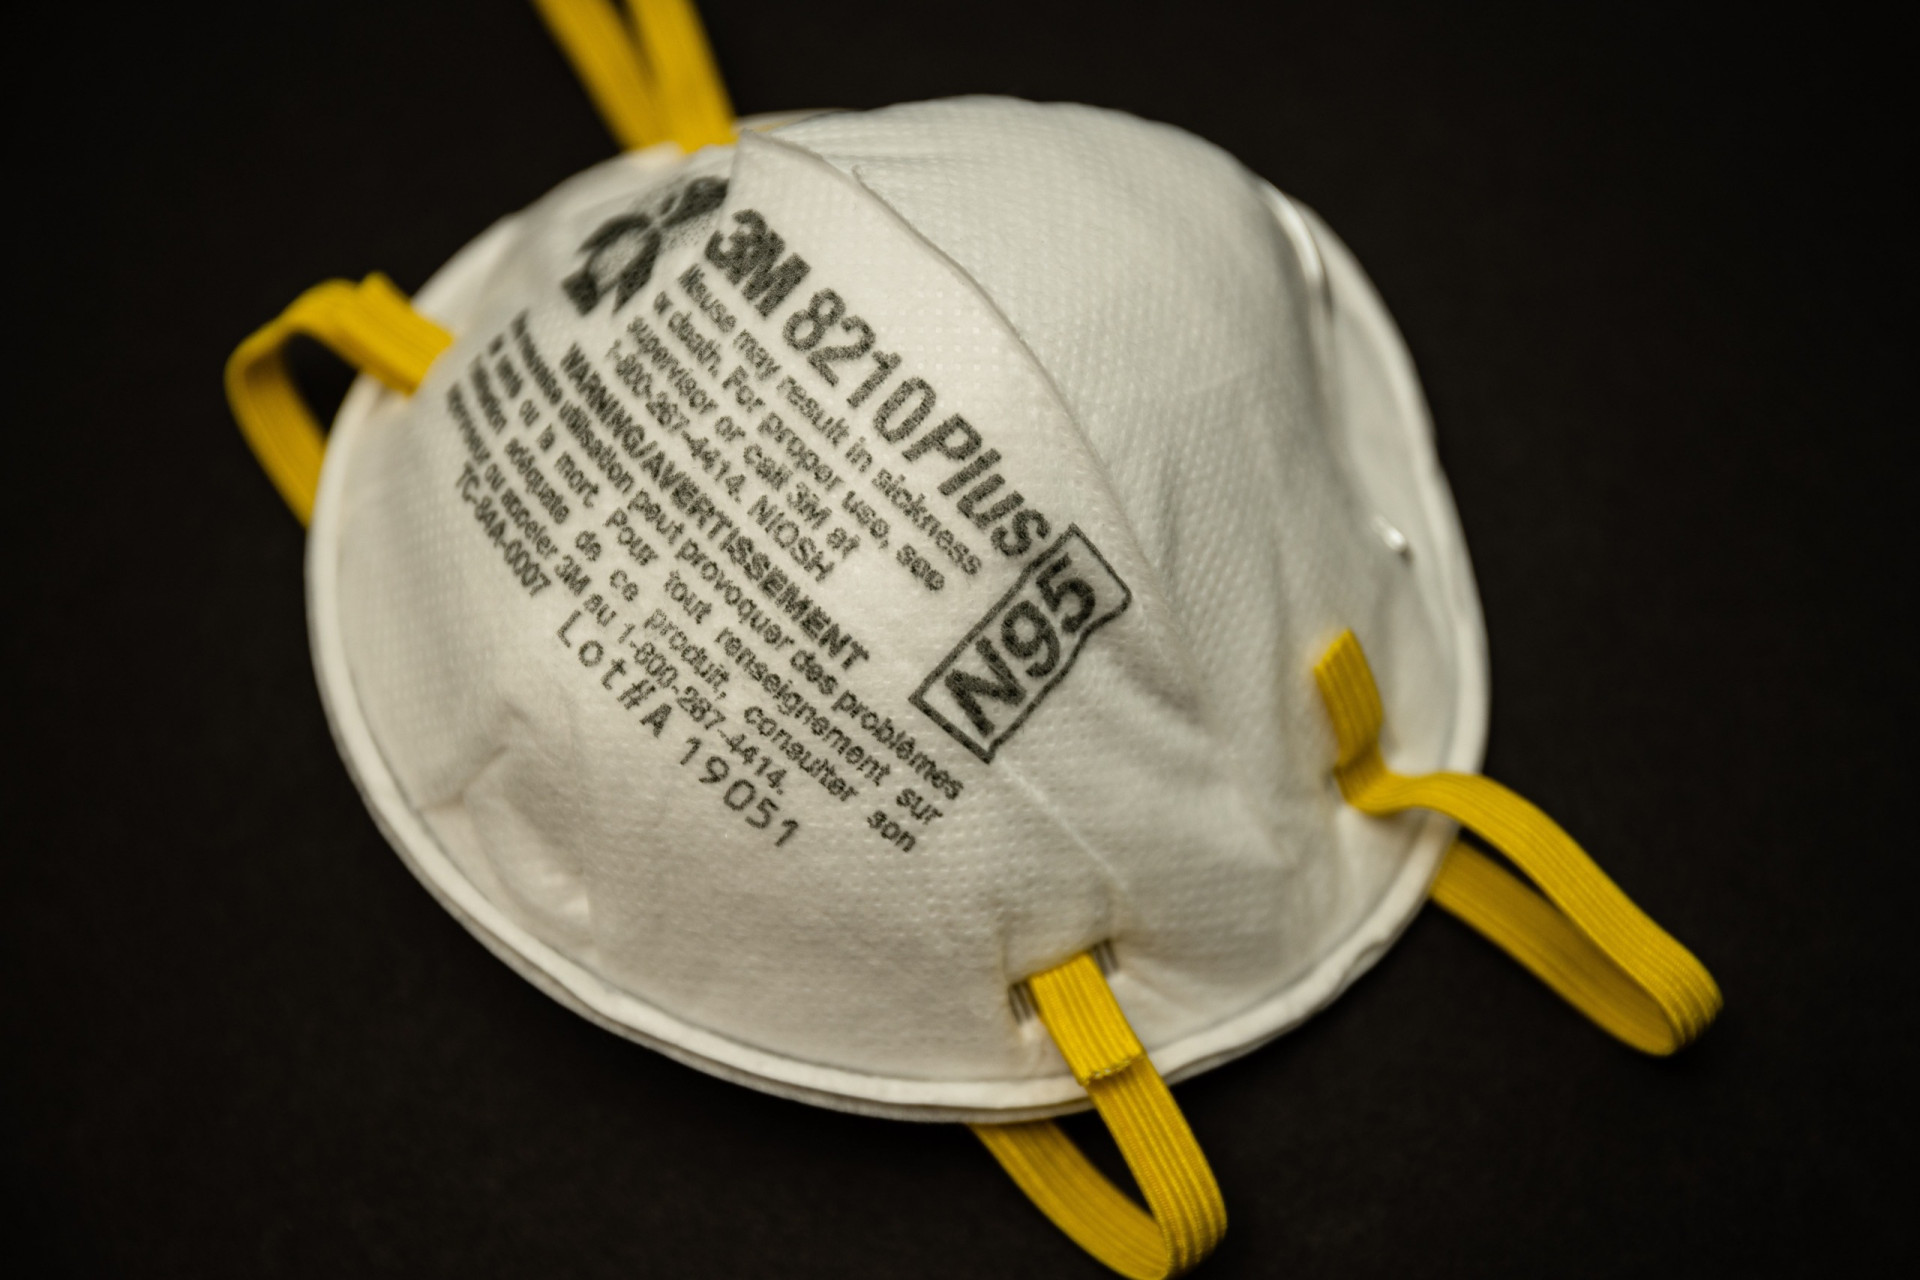 A photo of an N95 mask, a 3M product known to contain trace amounts of forever chemicals